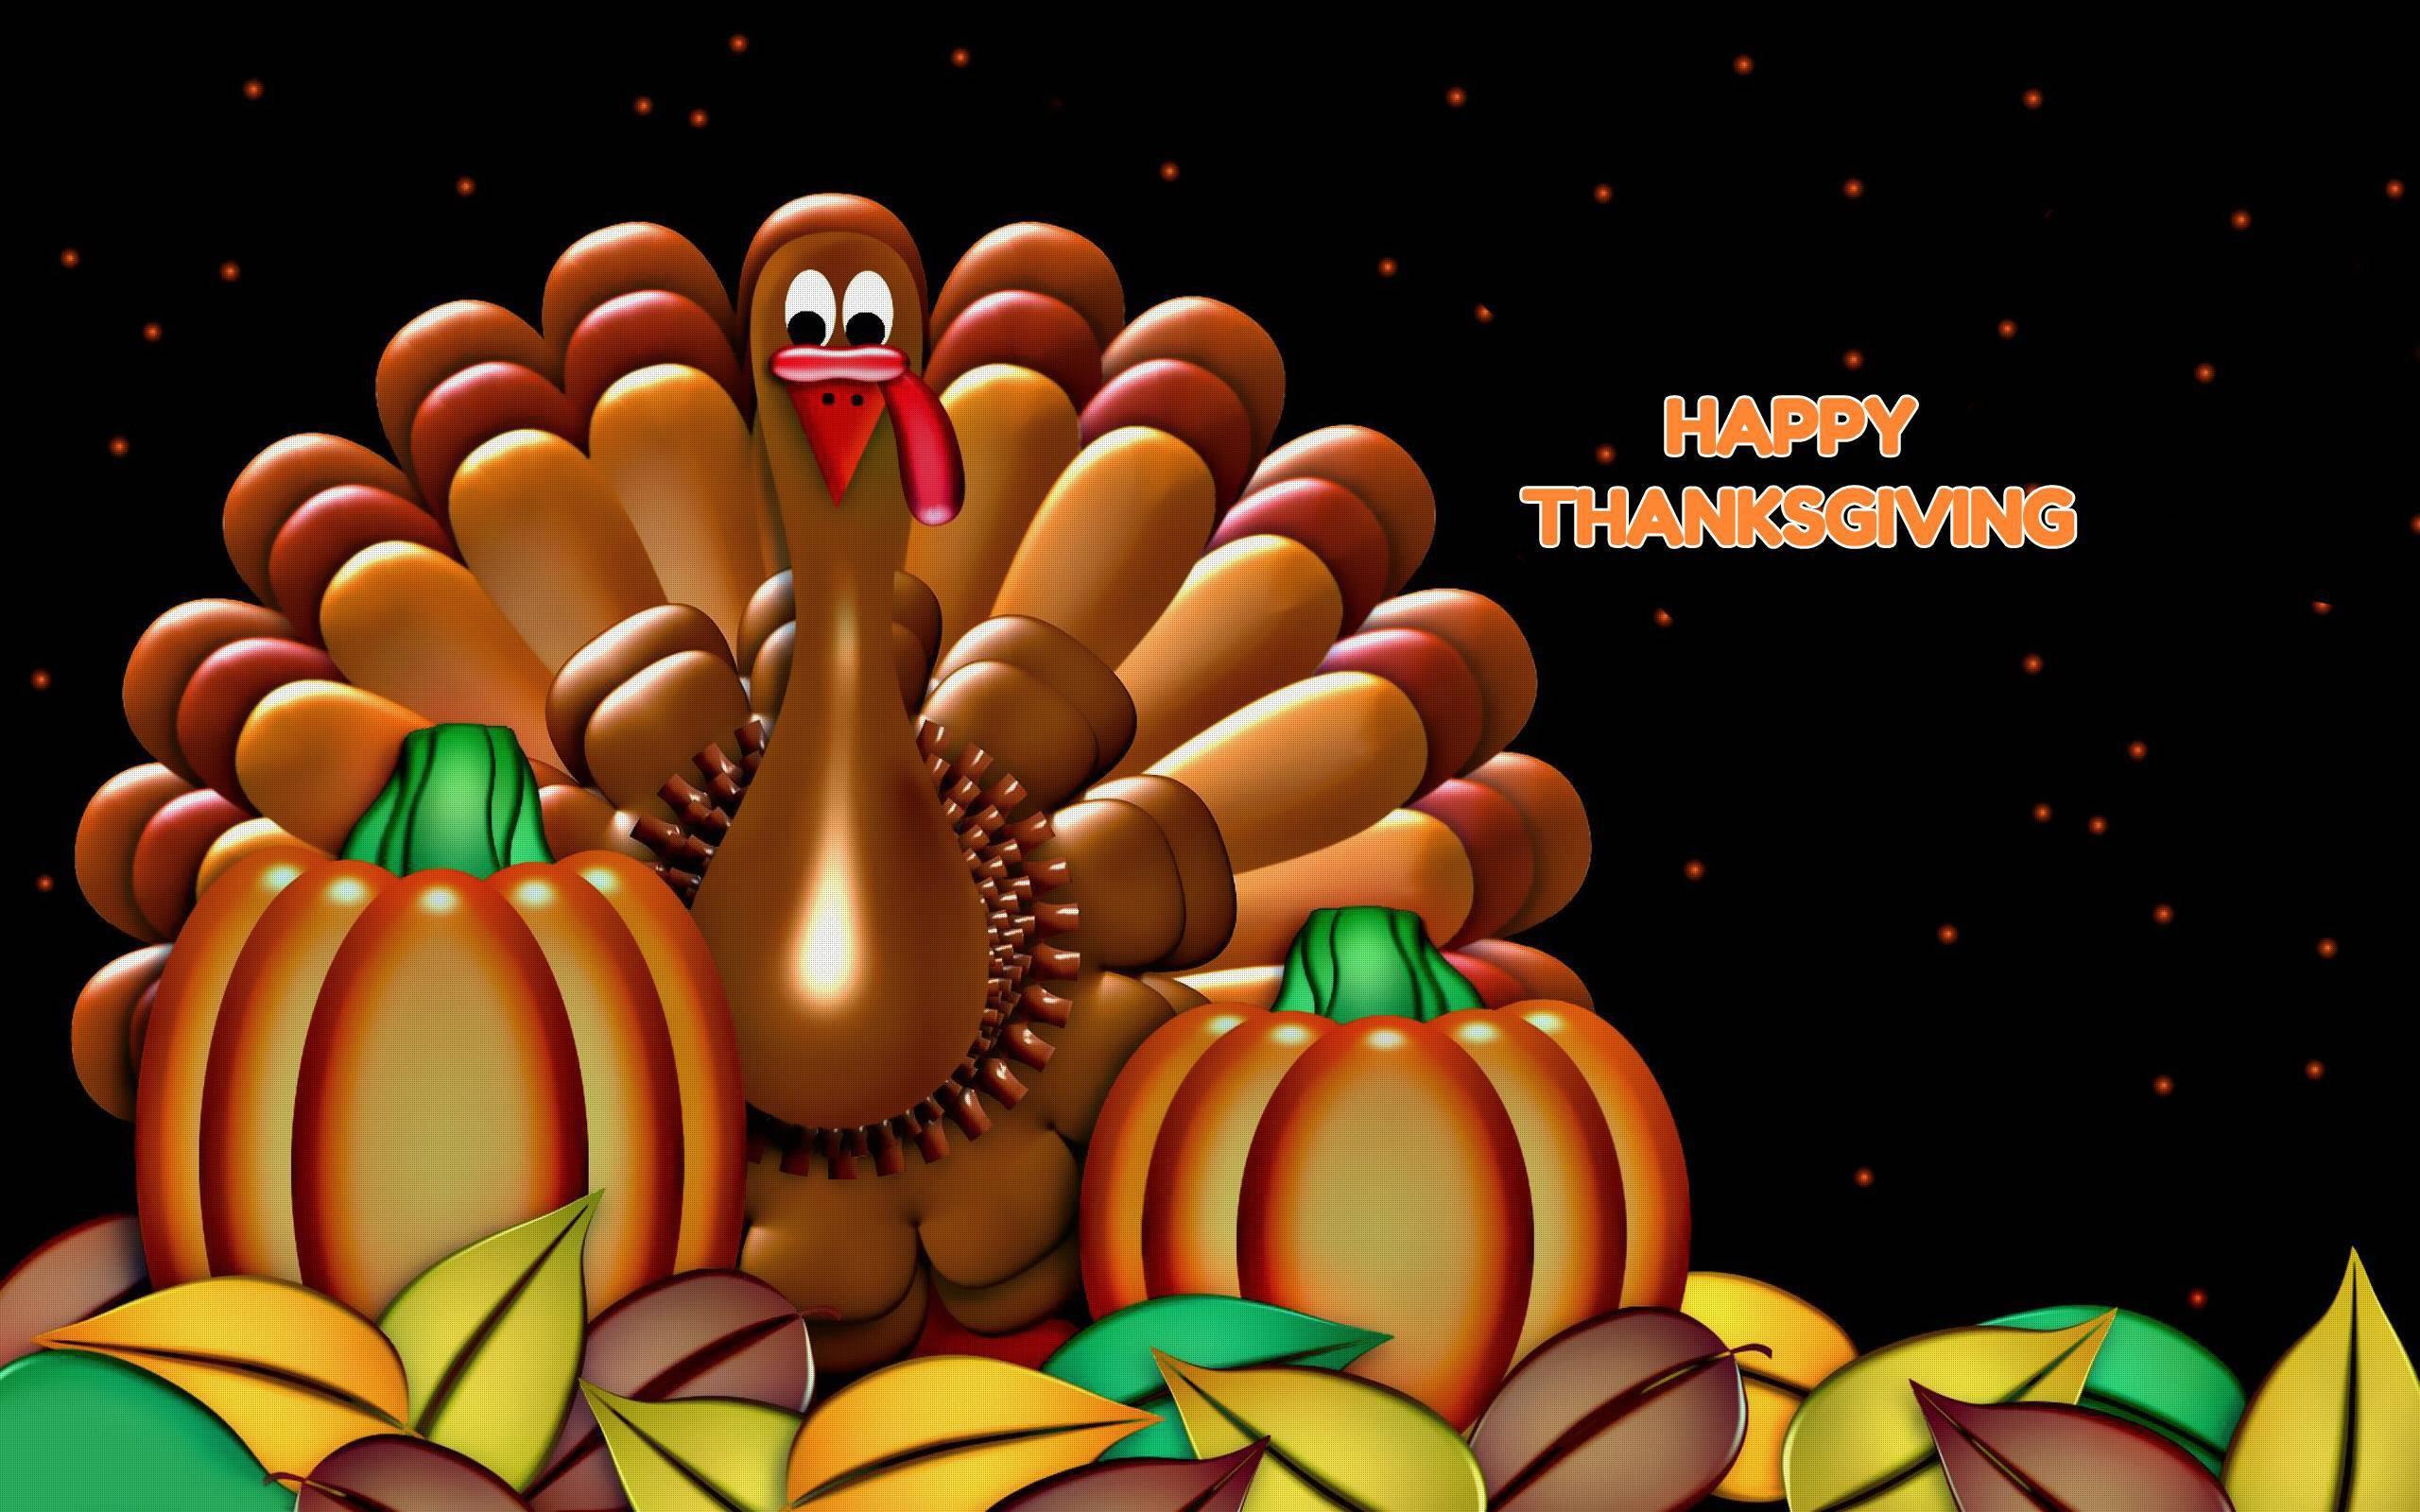 Happy Thanksgiving Wallpaper (the best image in 2018)